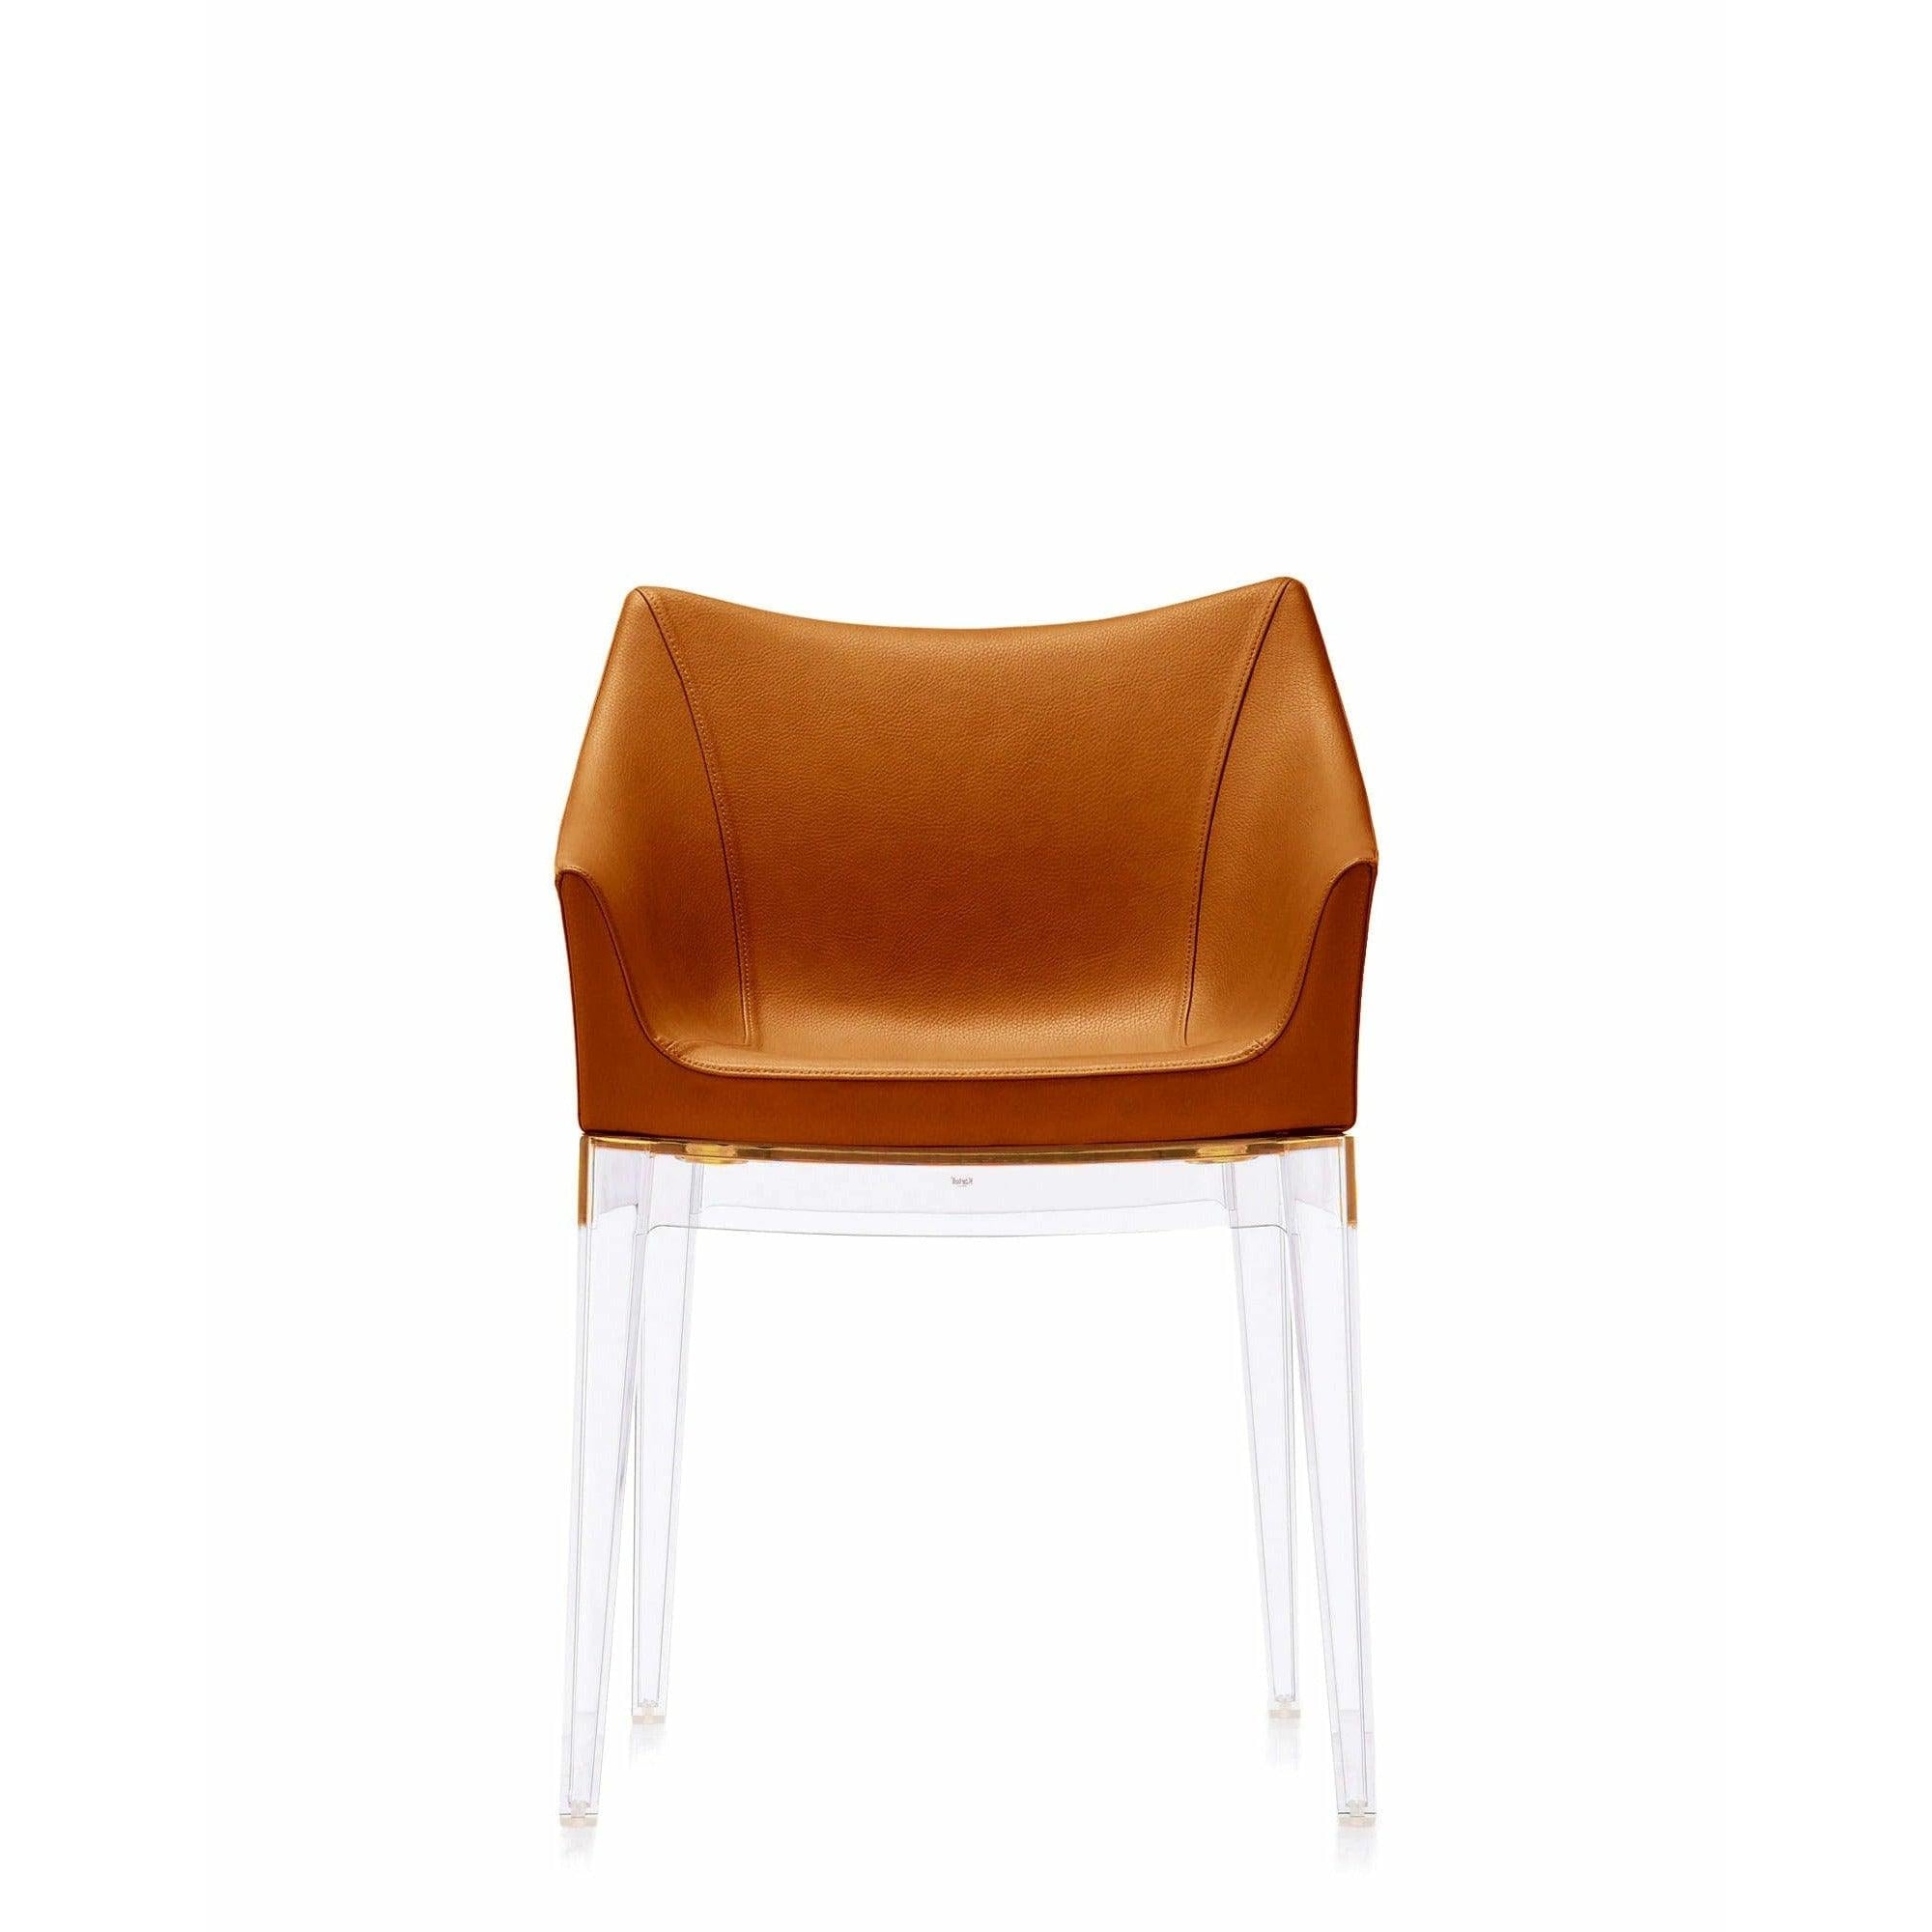 Madame Armchair - Curated Furniture $1000-$2000, armchair, beige, Black, brown, chair, chairs, desk chair, dining chair, gray, Green, kartell, lounge chair, Memorial Weekend Sale, Philippe Starck, purple